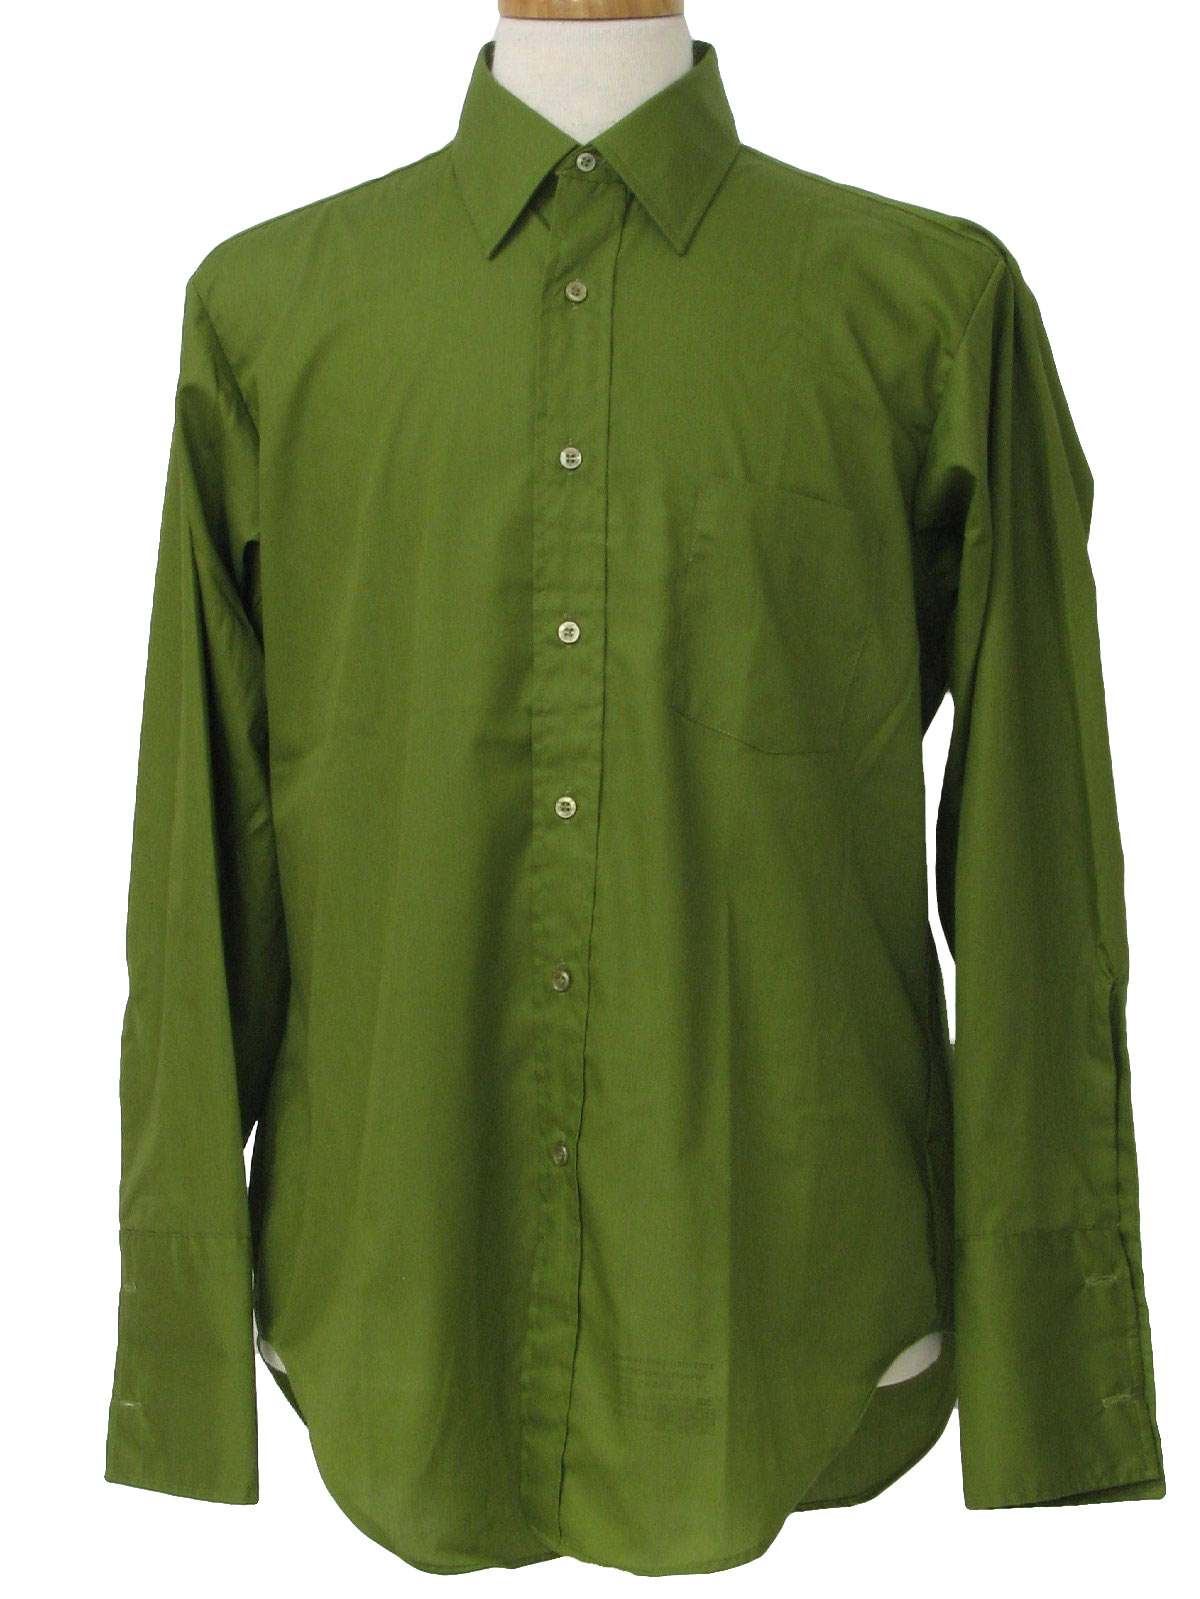 Retro 1970's Shirt (Kent Collection by Arrow) : Early 70s -Kent ...